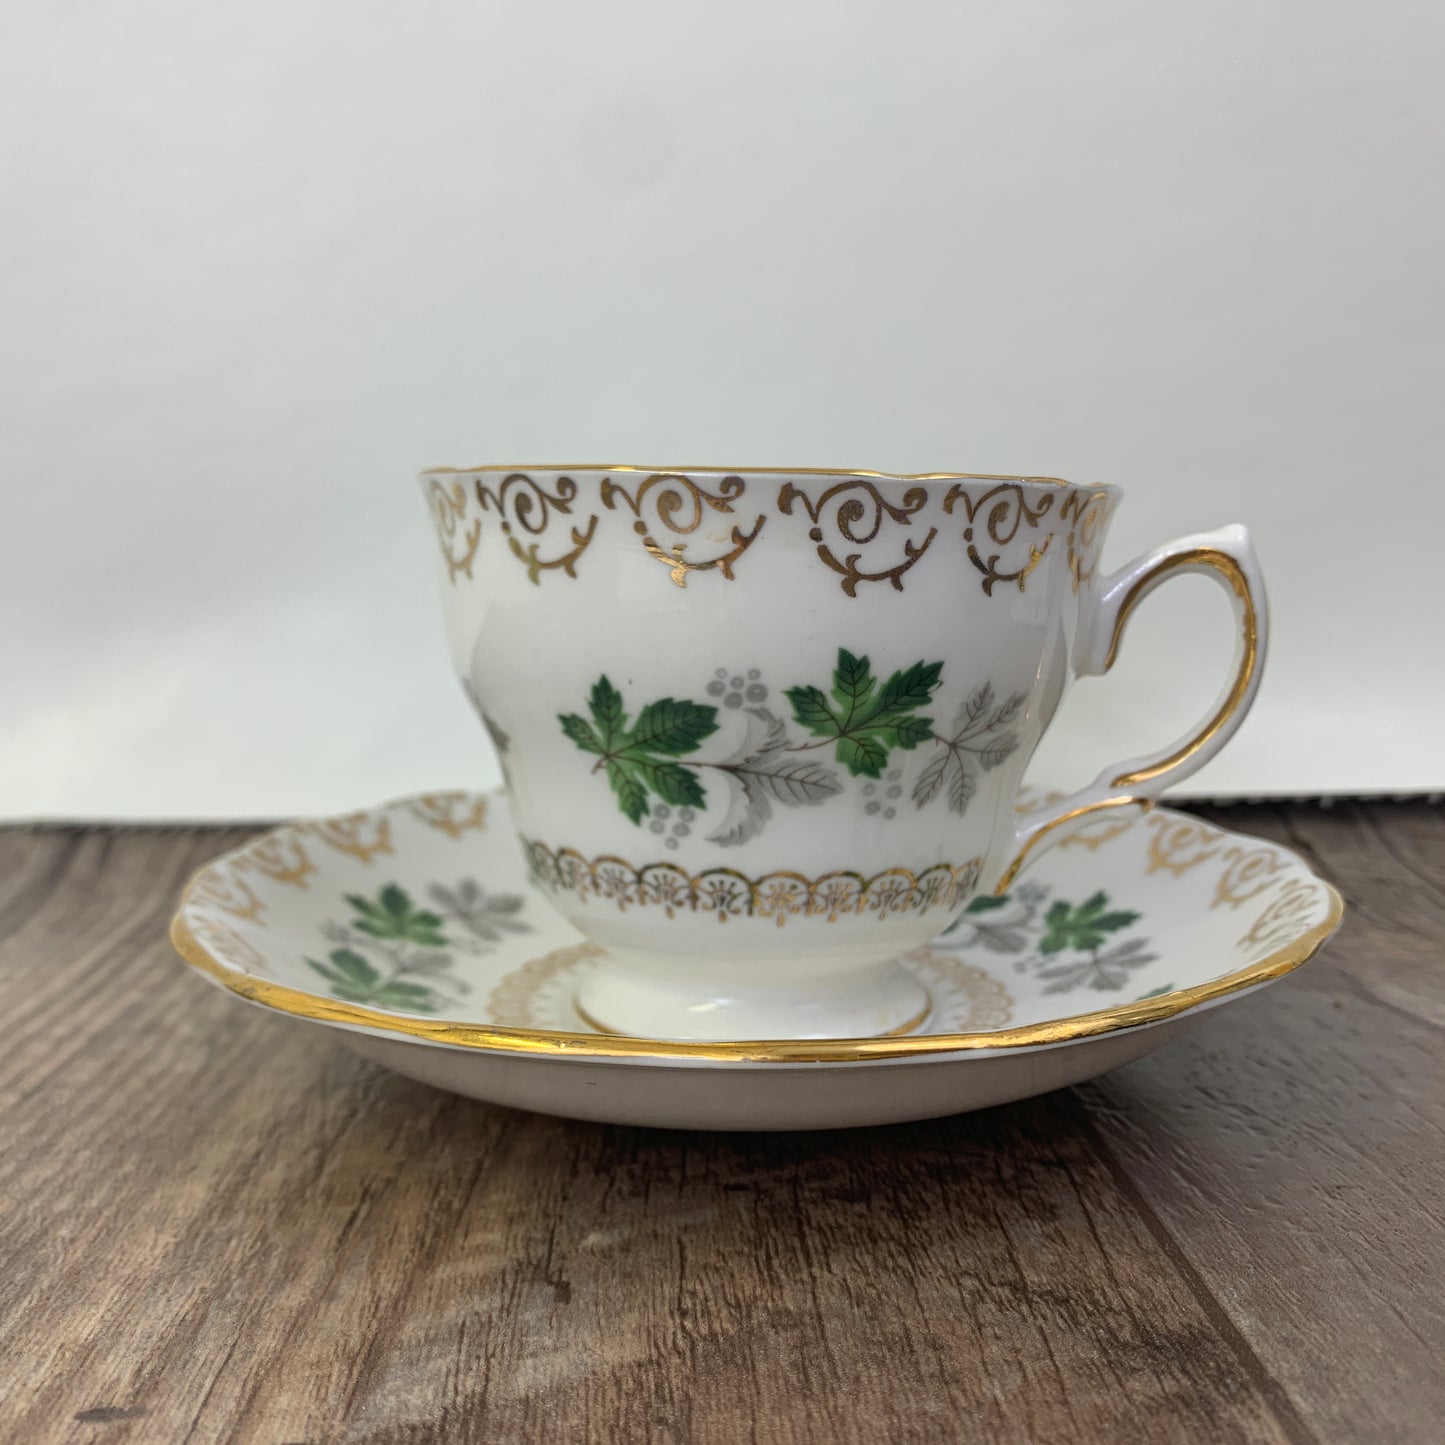 Colclough China Tea Cup, Maple Leaf Pattern Vintage Teacup, Gifts for Mom